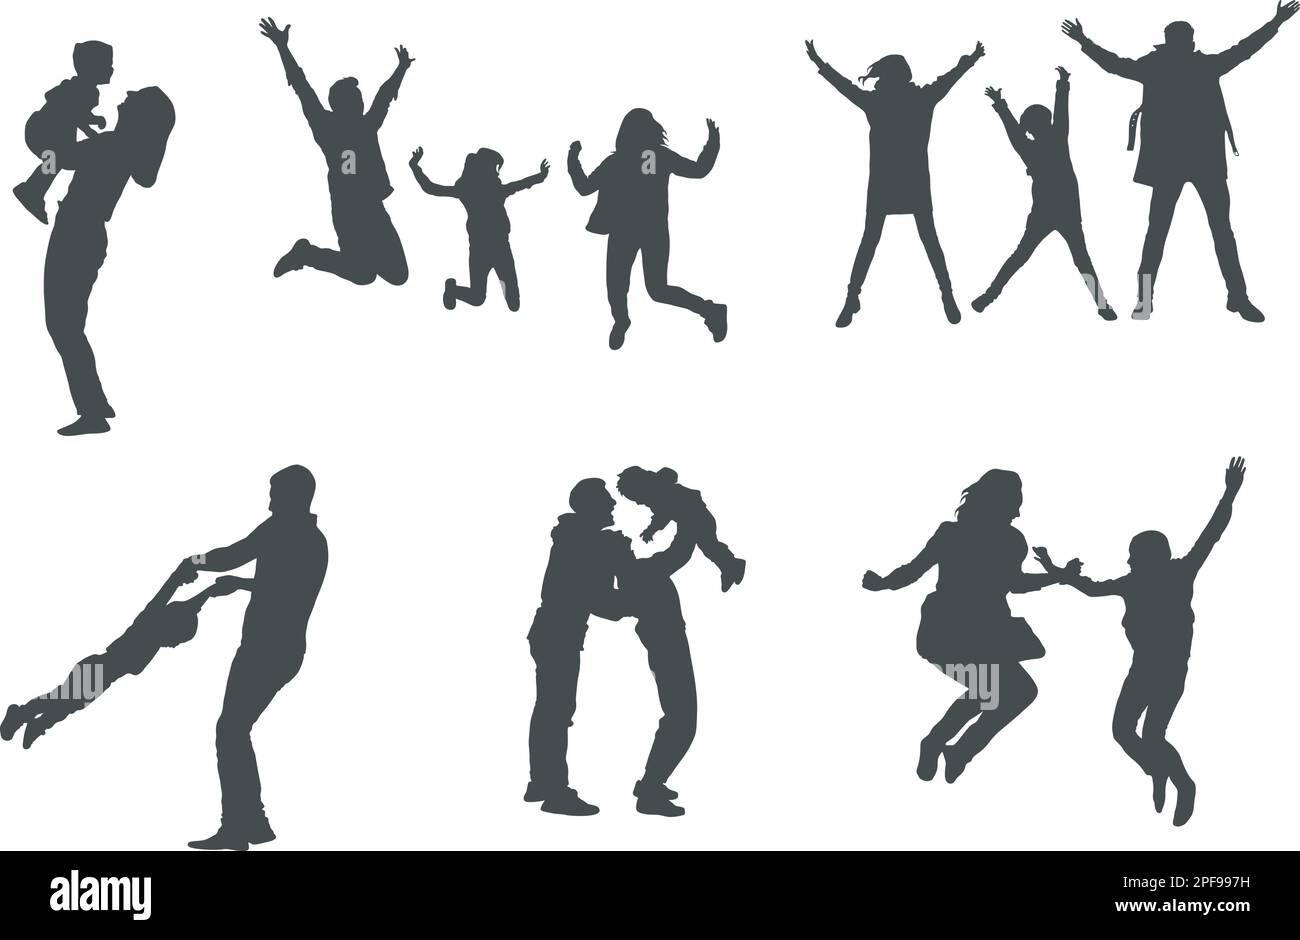 Happy Jumping Family Silhouette, Jumping Family Silhouette, Jumping Silhouette, Happy Family Silhouettes, Happy Family Jumping Silhouettes Stock Vektor